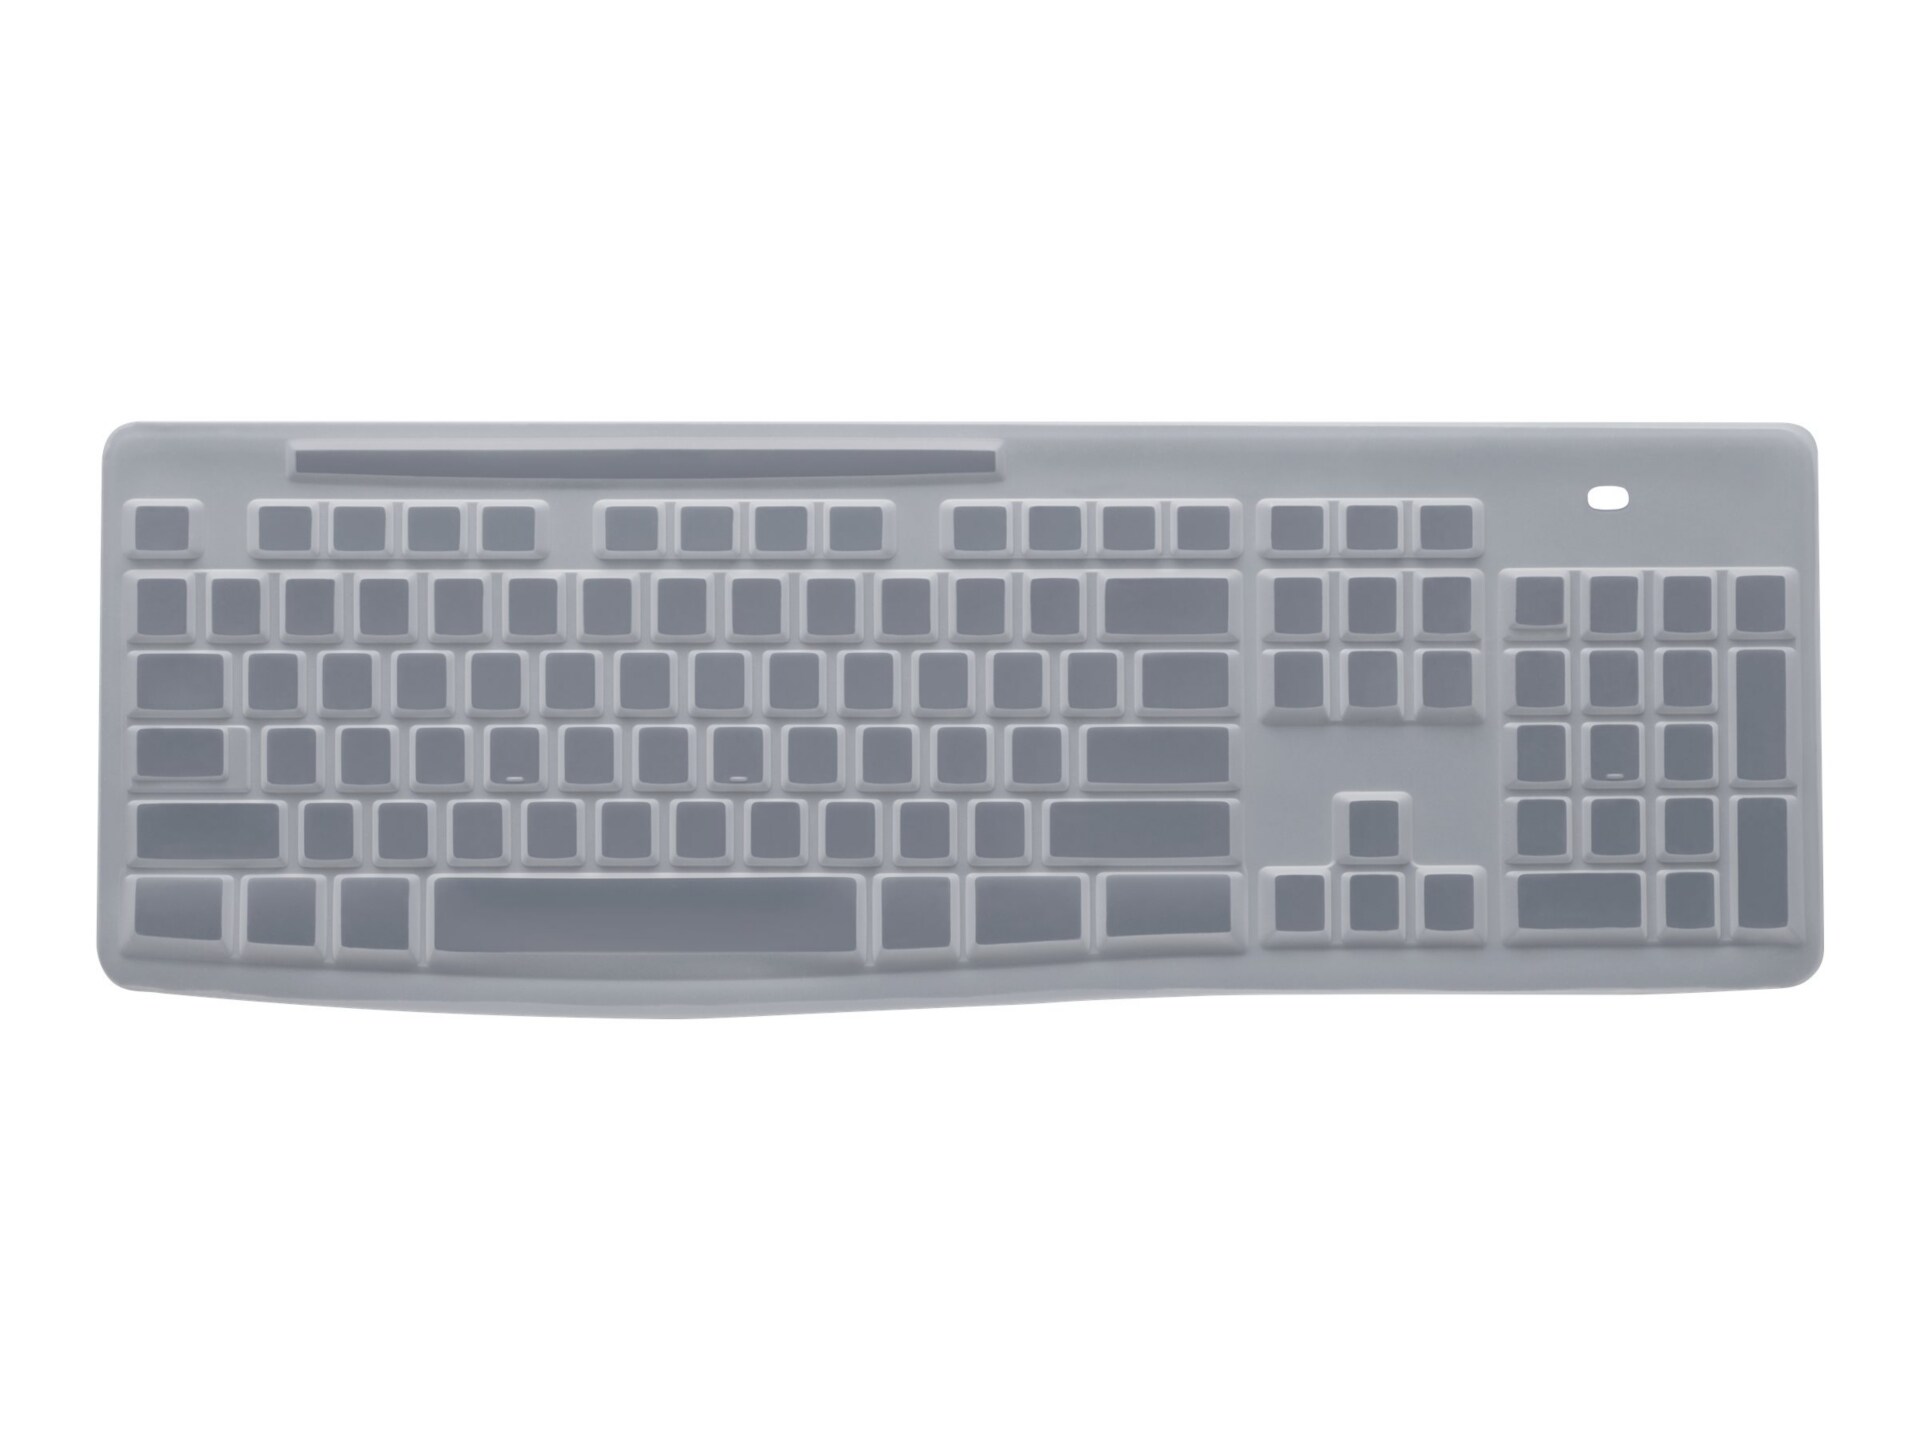 Logitech Protective Cover for K270 Keyboard for Education - keyboard cover